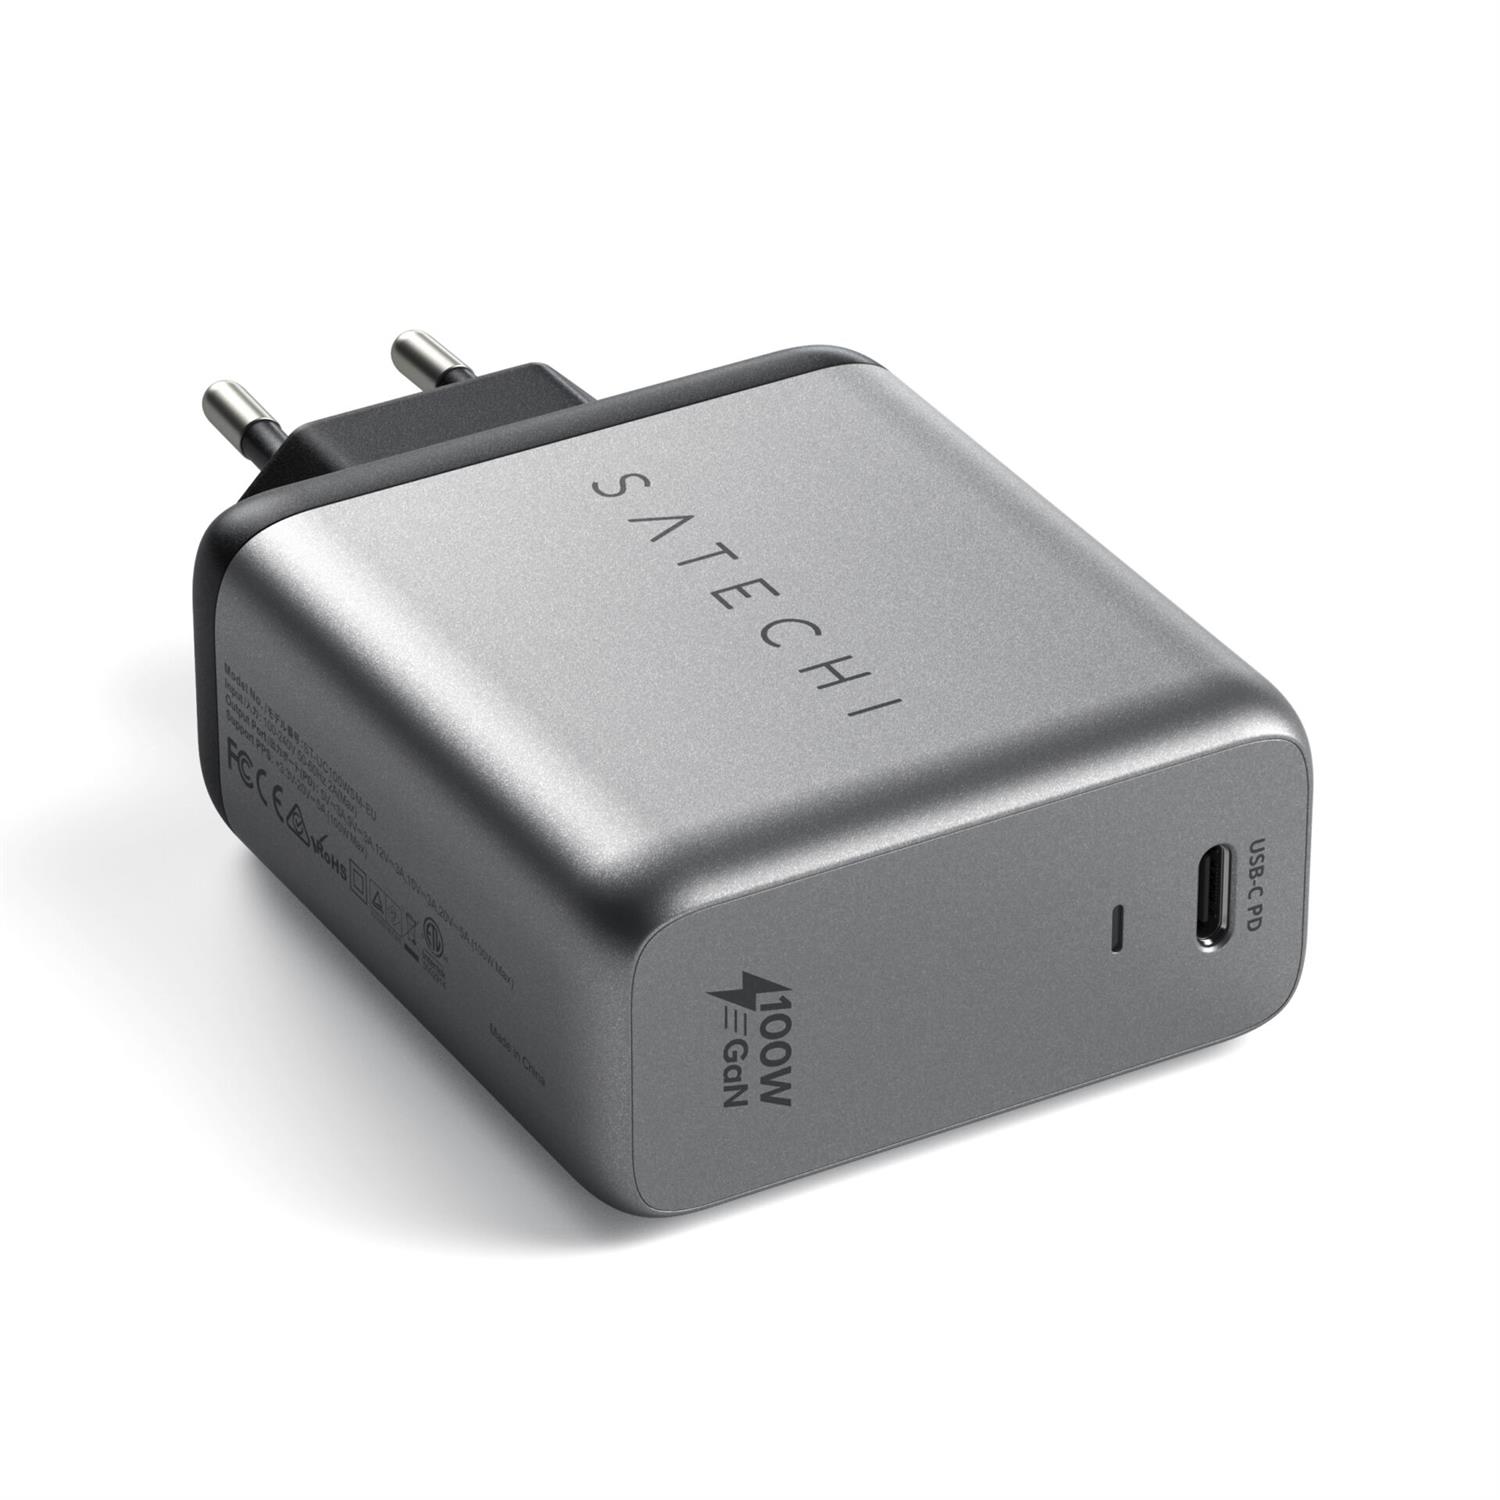 Satechi 100W USB-C PD GaN Wall Charger - space gray